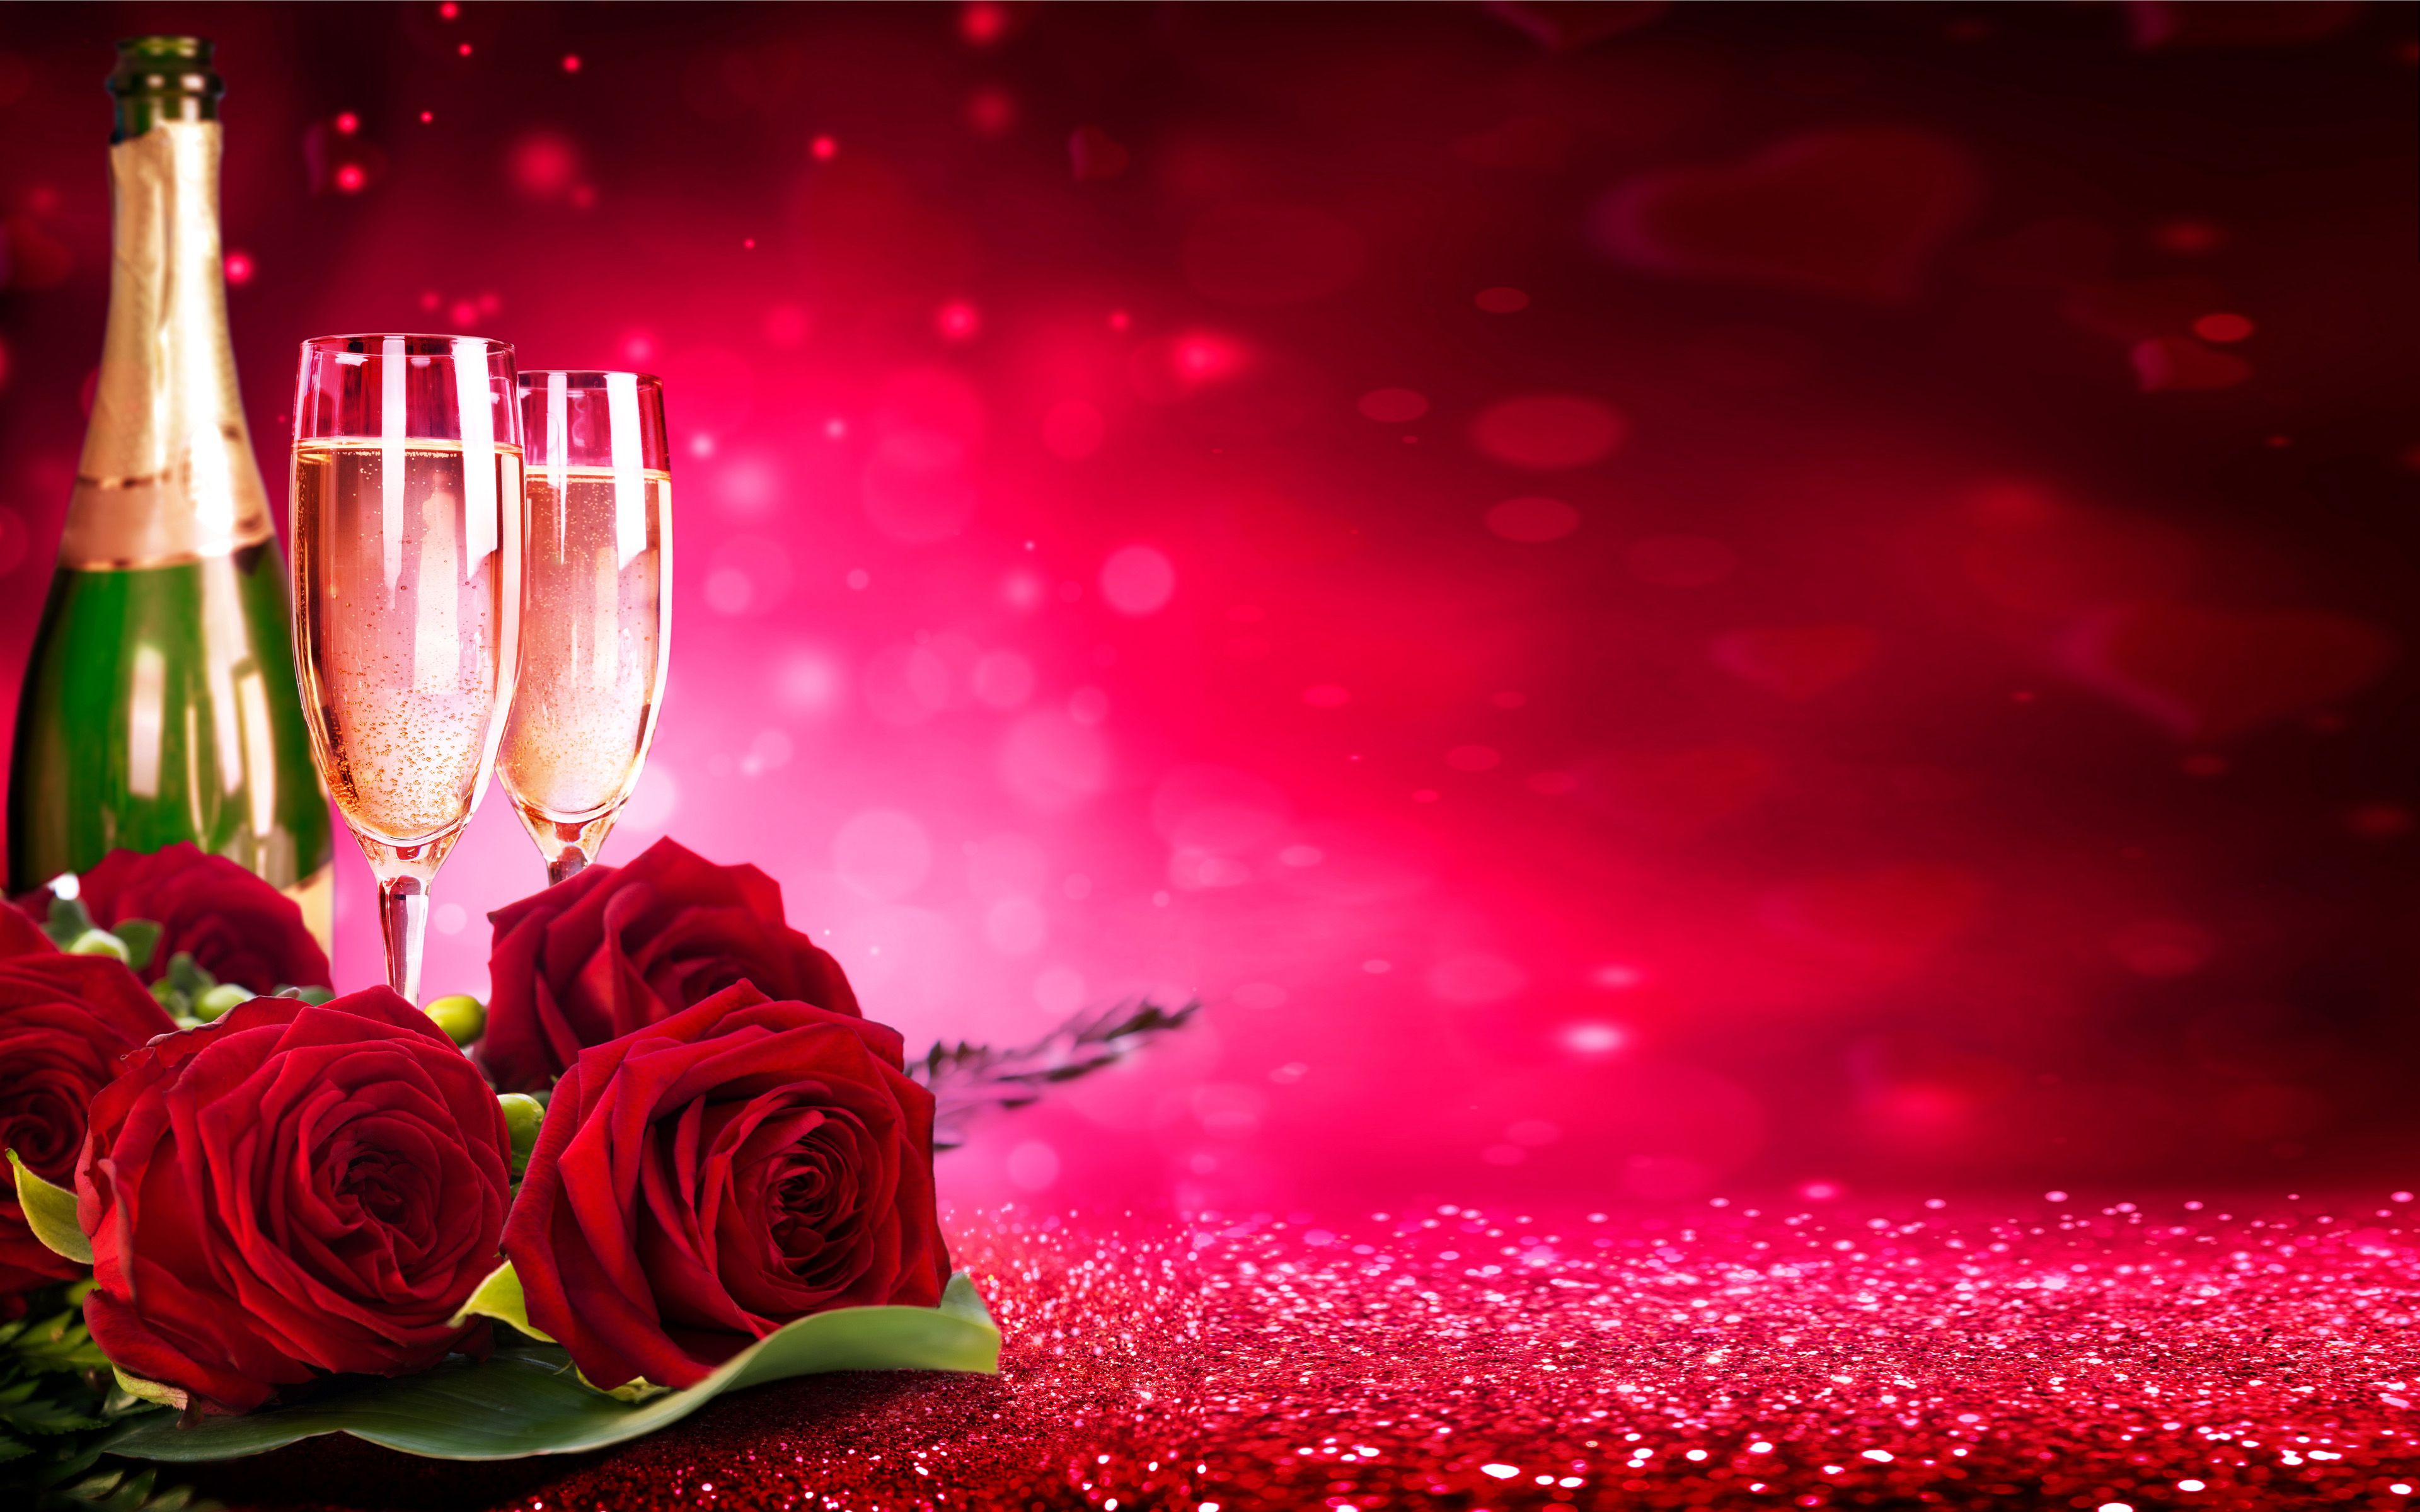 Valentine Champagne And Flower Red Roses Hd Wallpapers Ultra Hd 4k Wallpapers For Desktop & Mobiles 3840x2400 : Wallpapers13